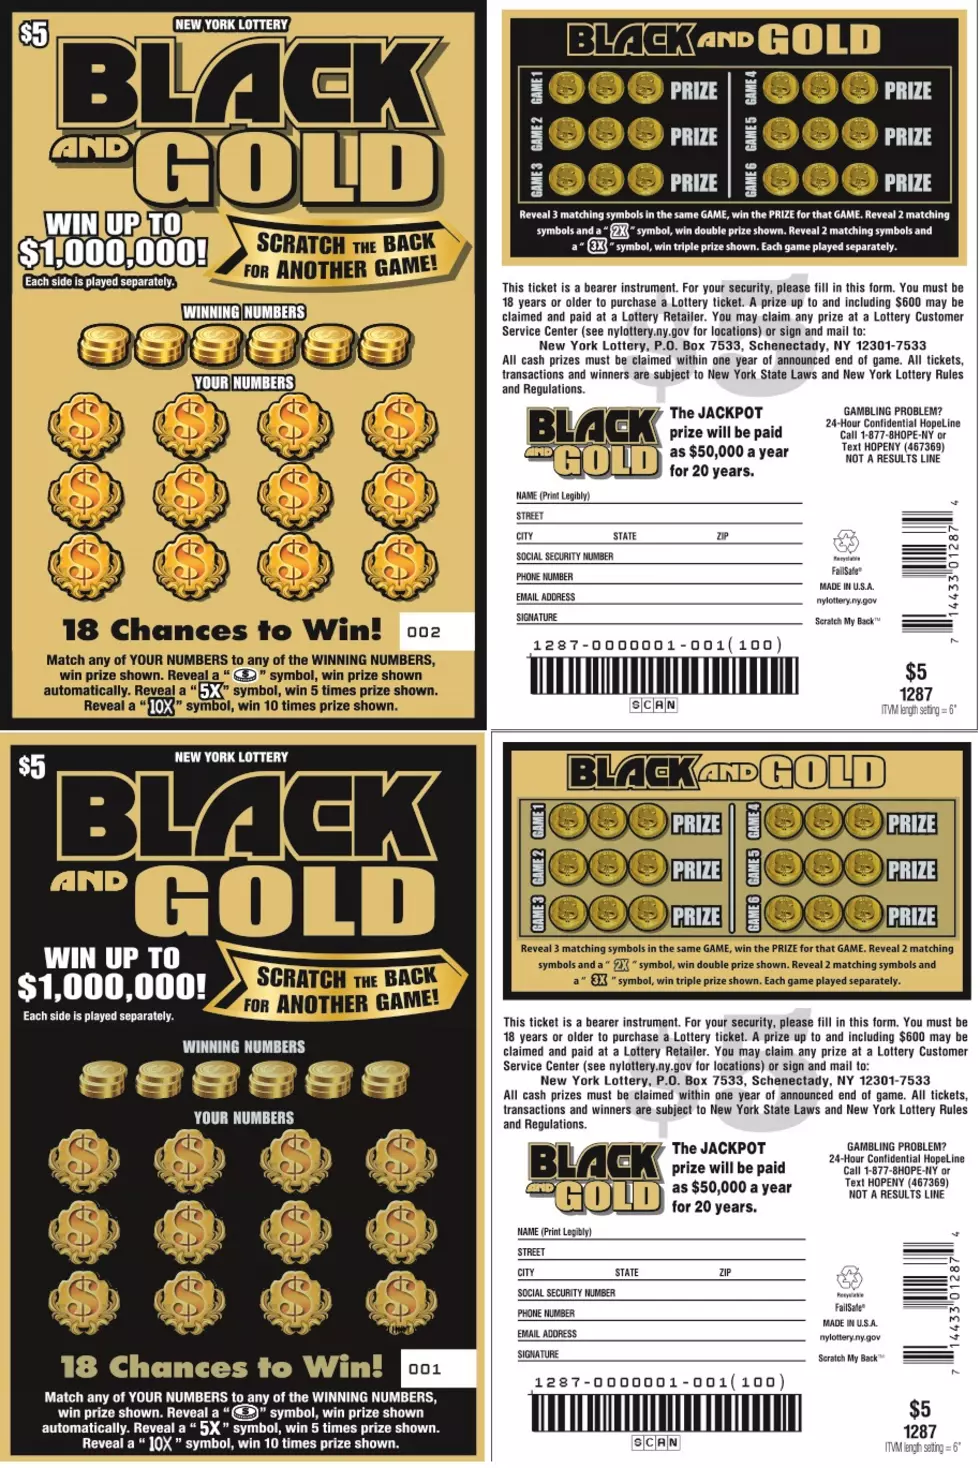 New York Lottery&#8217;s Black and Gold Official Contest Rules